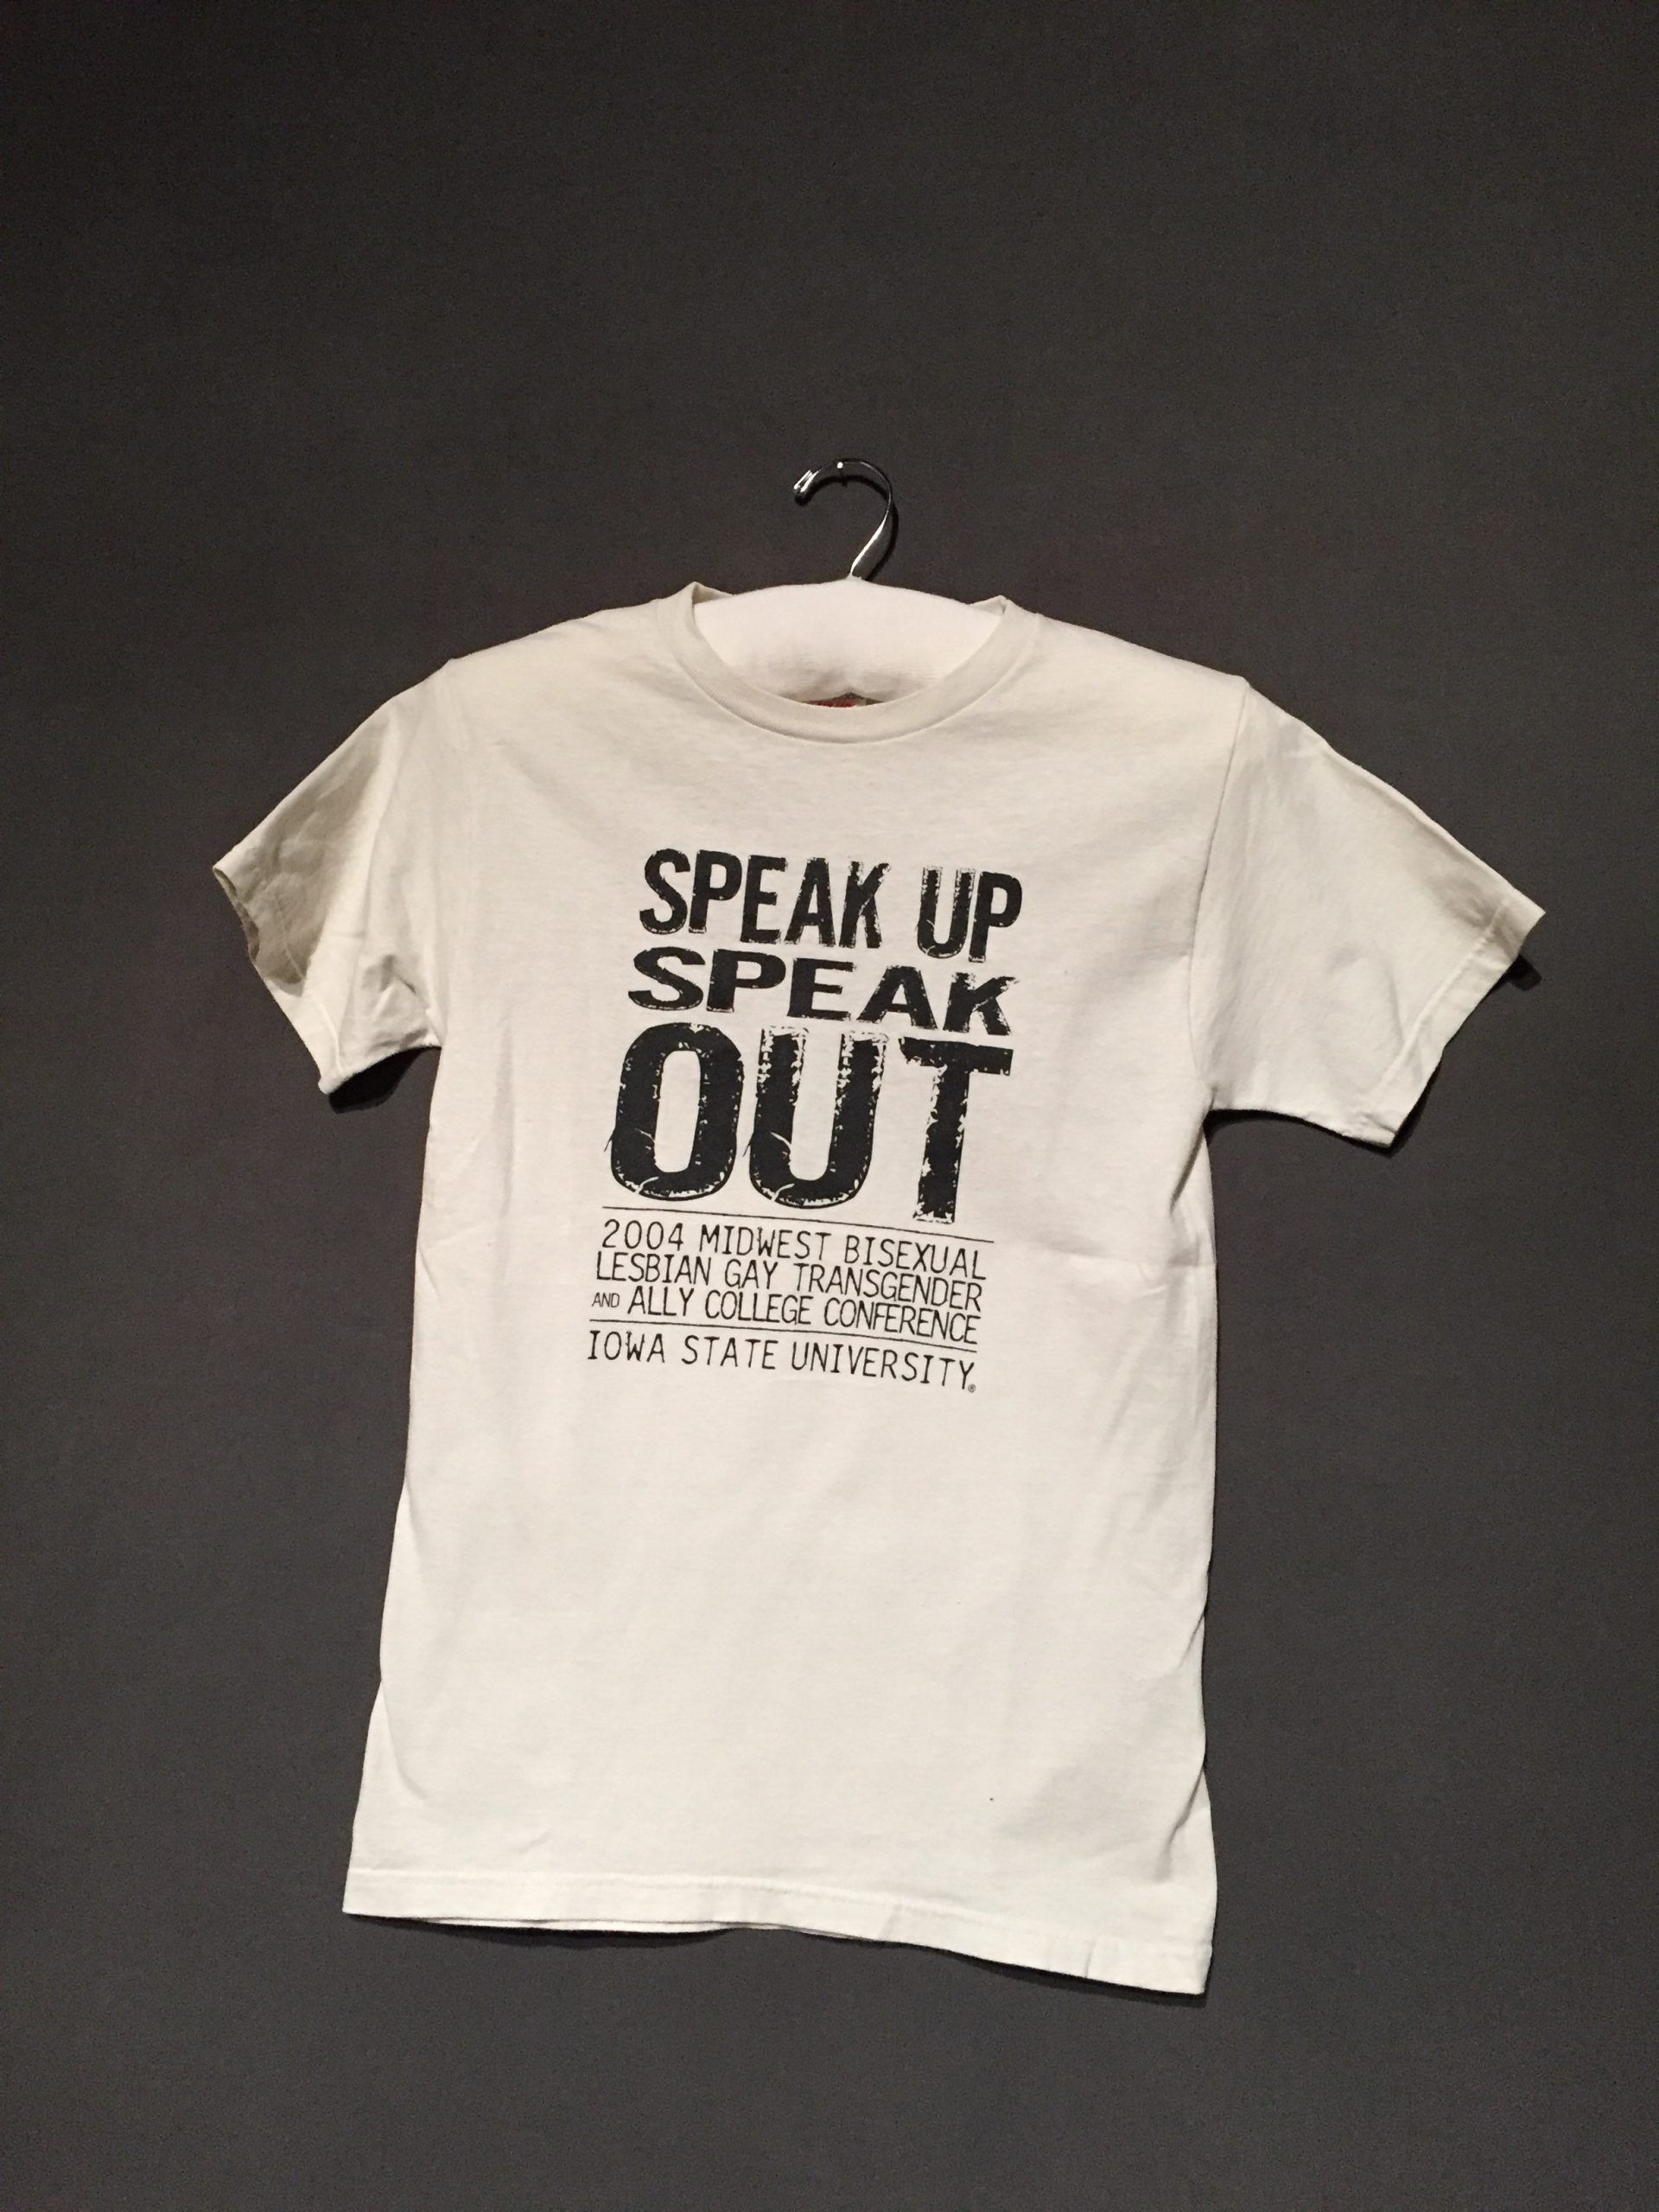 White short sleeve t-shirt with black text reading: "Speak Up Speak Out: 2004 Midwest Bisexual Lesbian Gay Transgender and Ally College Conference, Iowa State University"